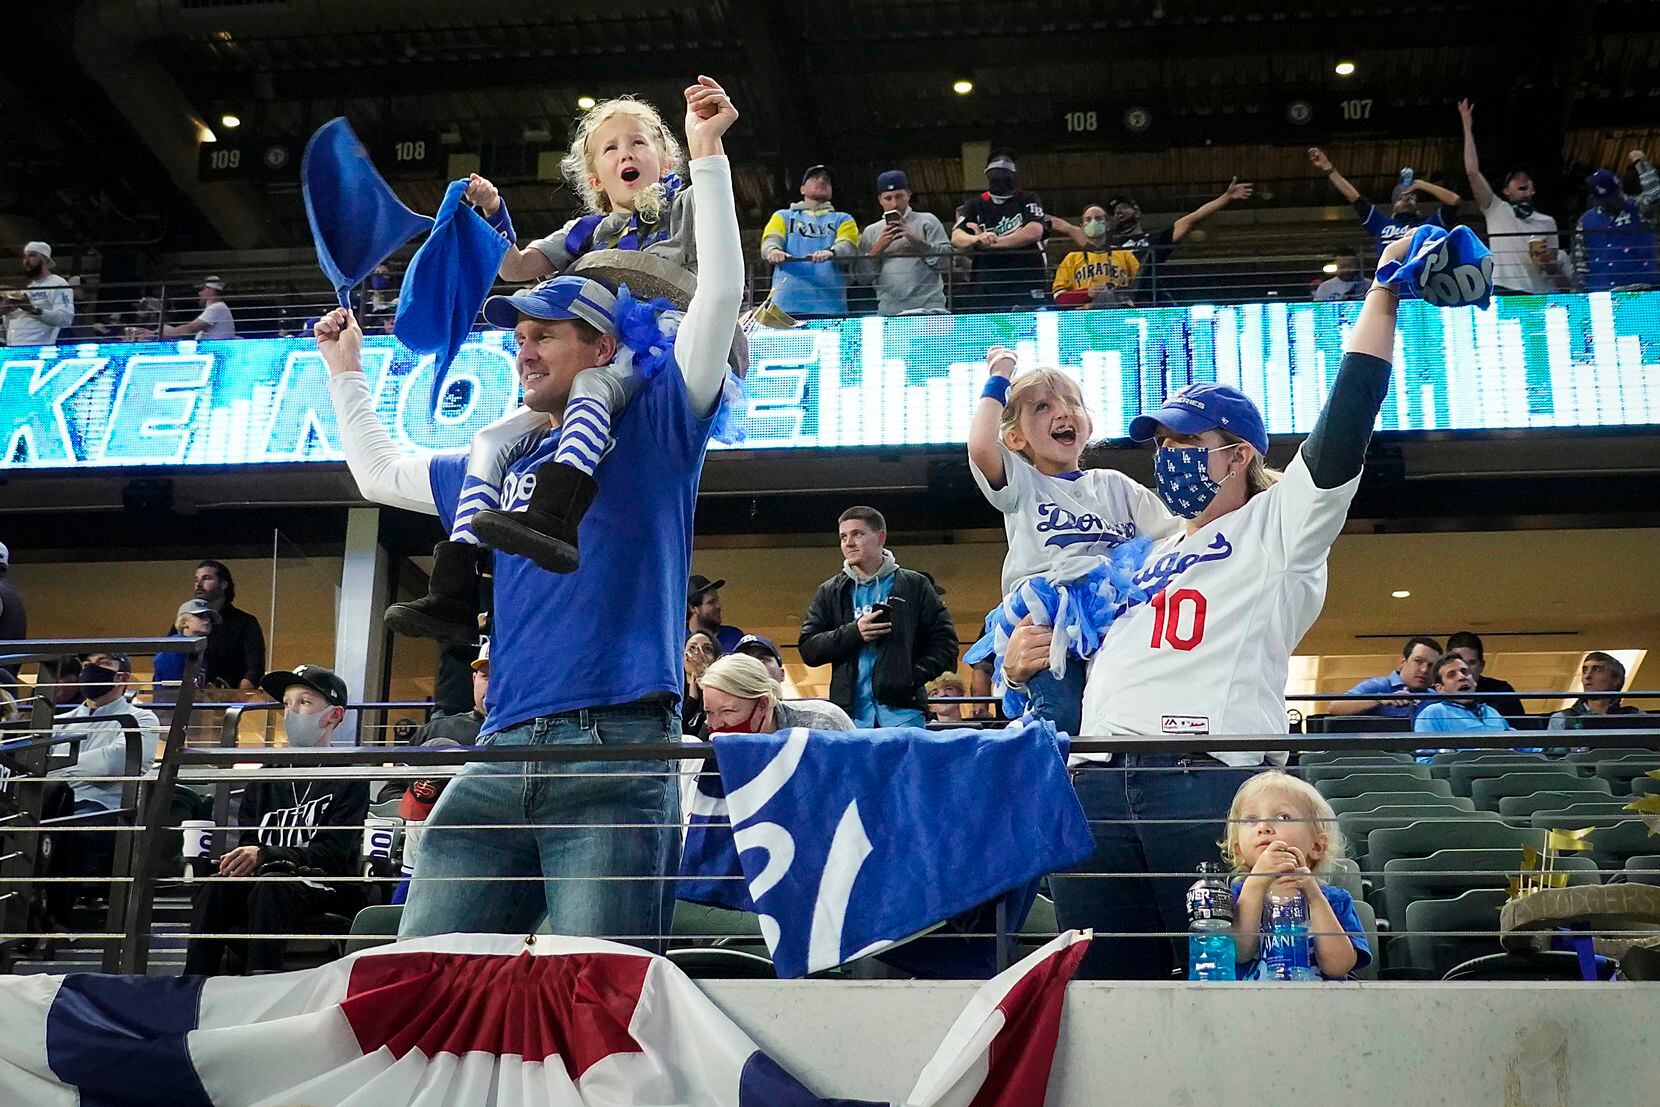 Los Angeles Dodgers fans cheer as their team takes the lead during a 2-run sixth inning...